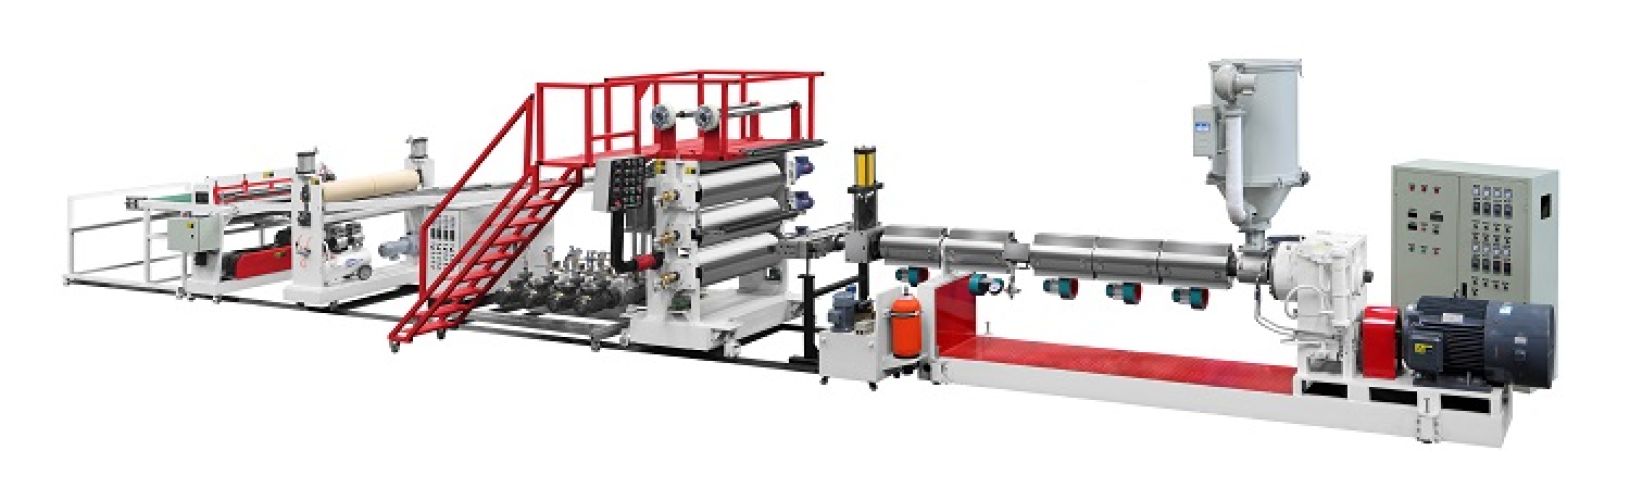 Luggage Extrusion Production line 1